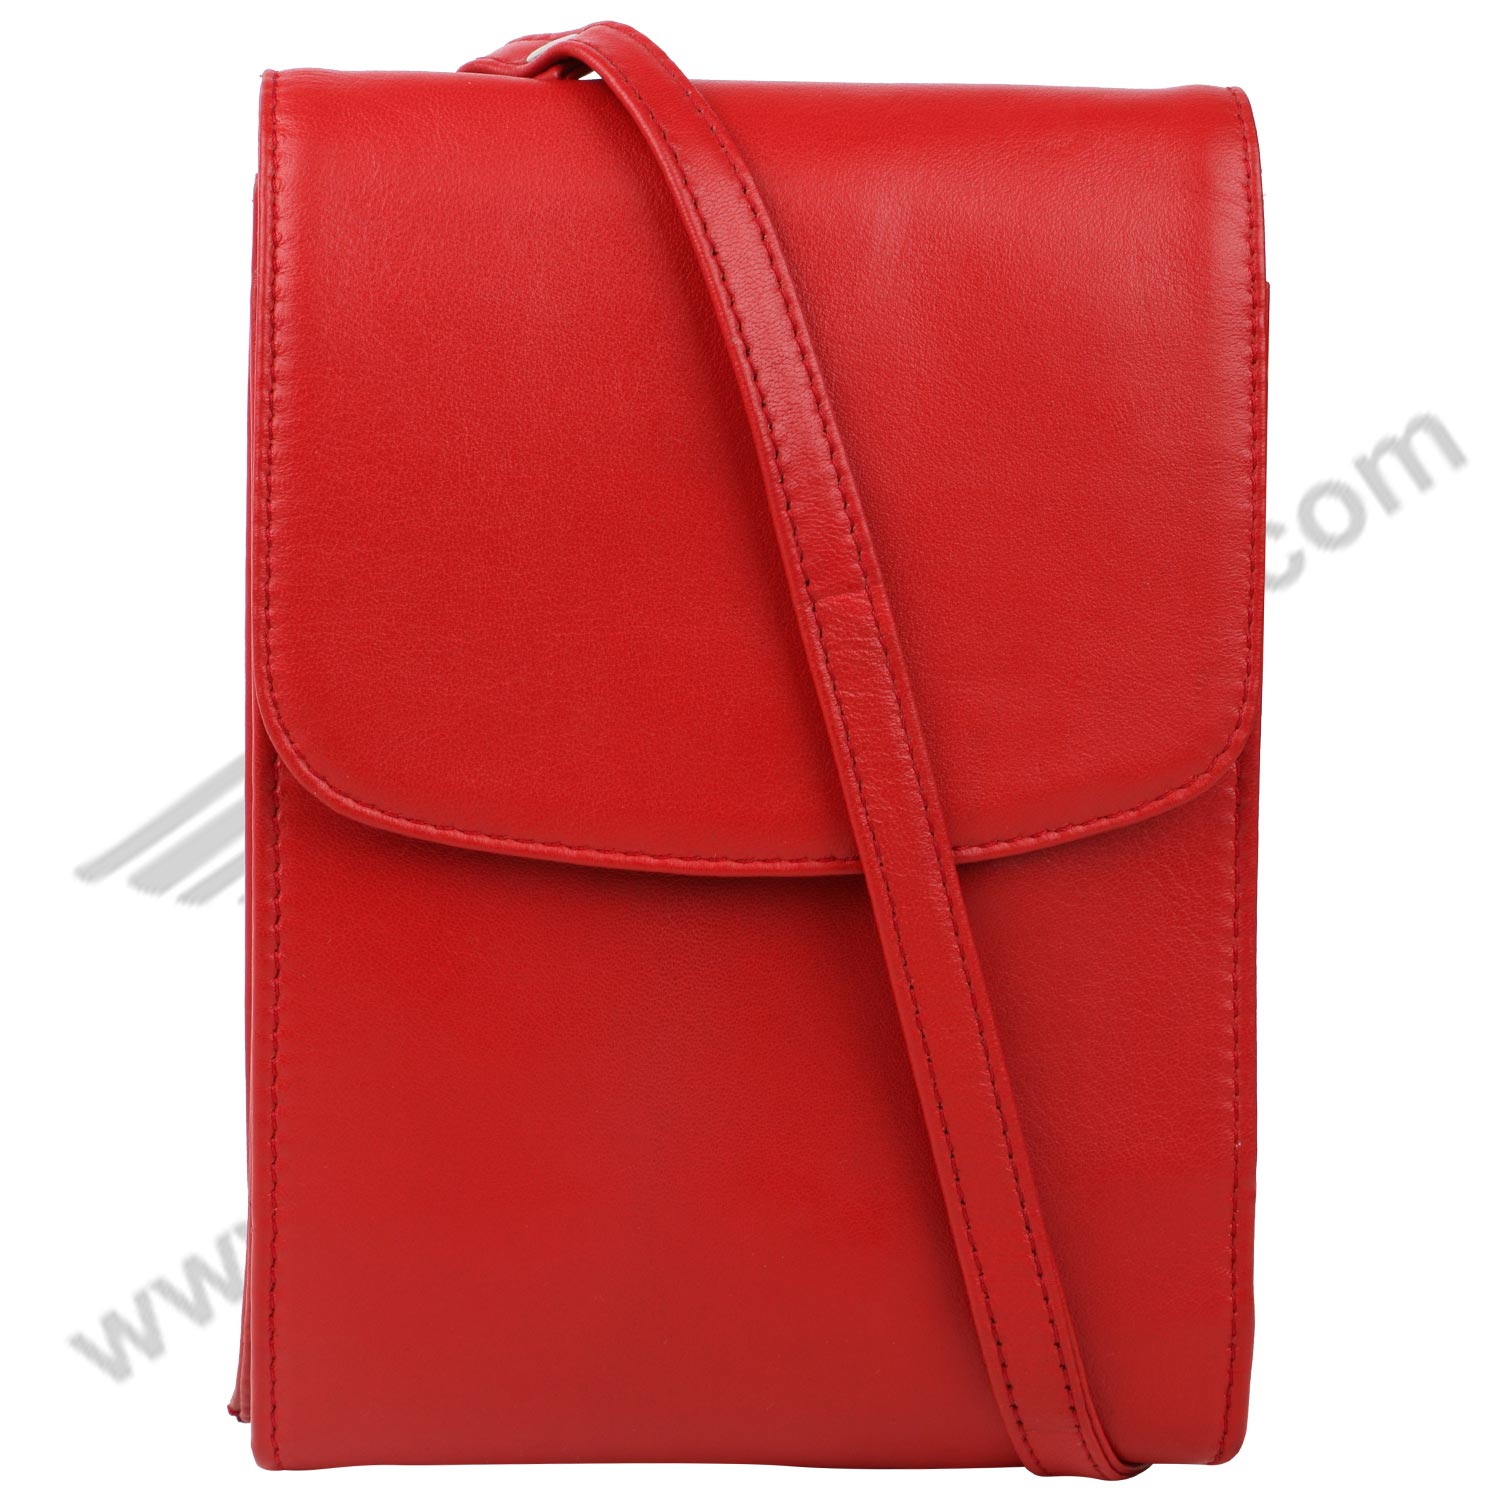 Front image of red sling bag. The sling is wrapped across it